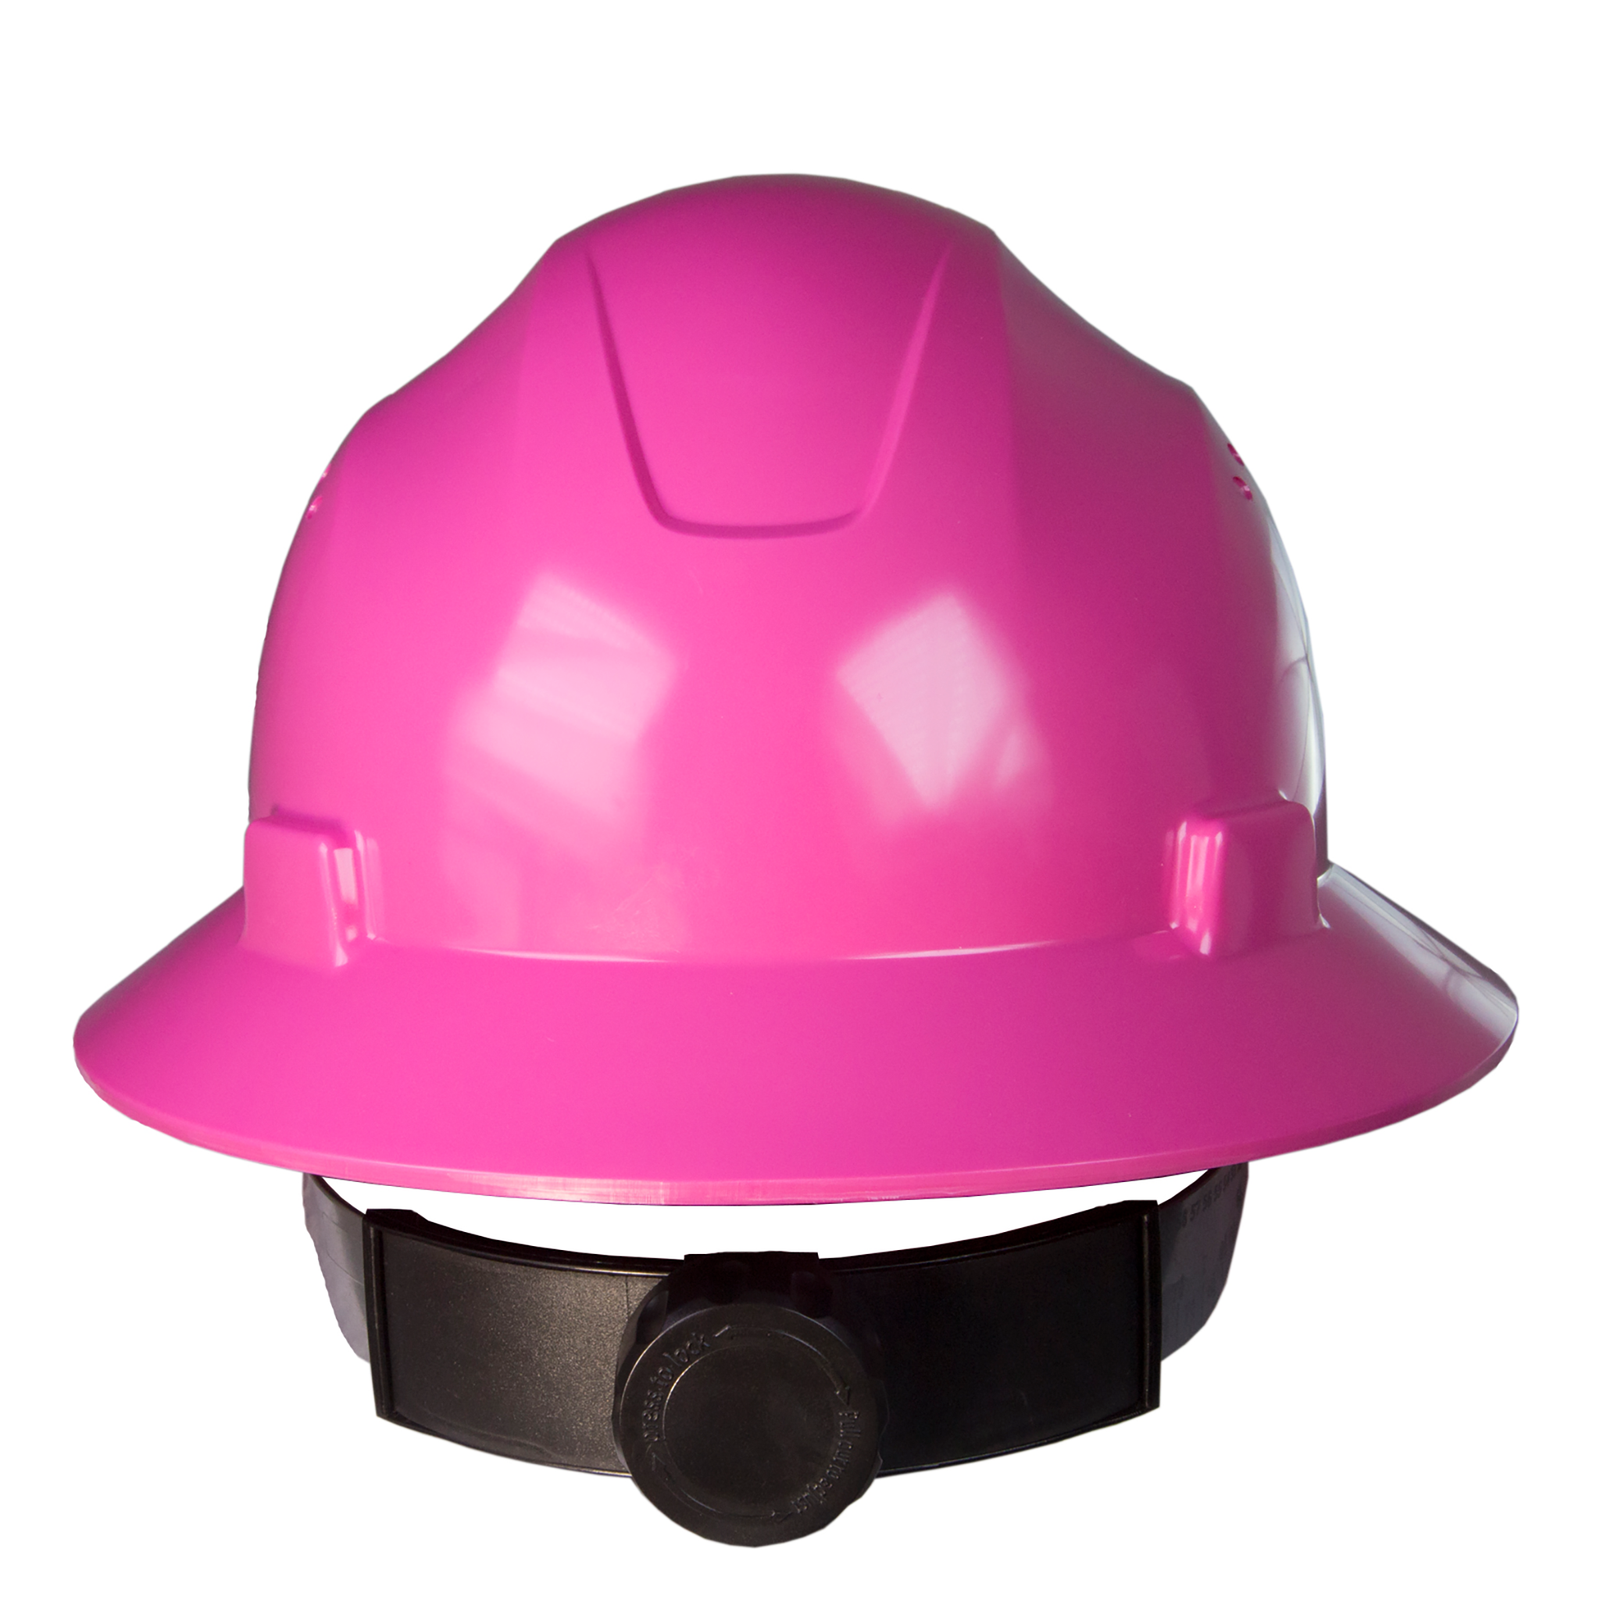 Full brim safety hard hat marked and tested ANSI Z89.1-14 Type I, Class C, E and G. 